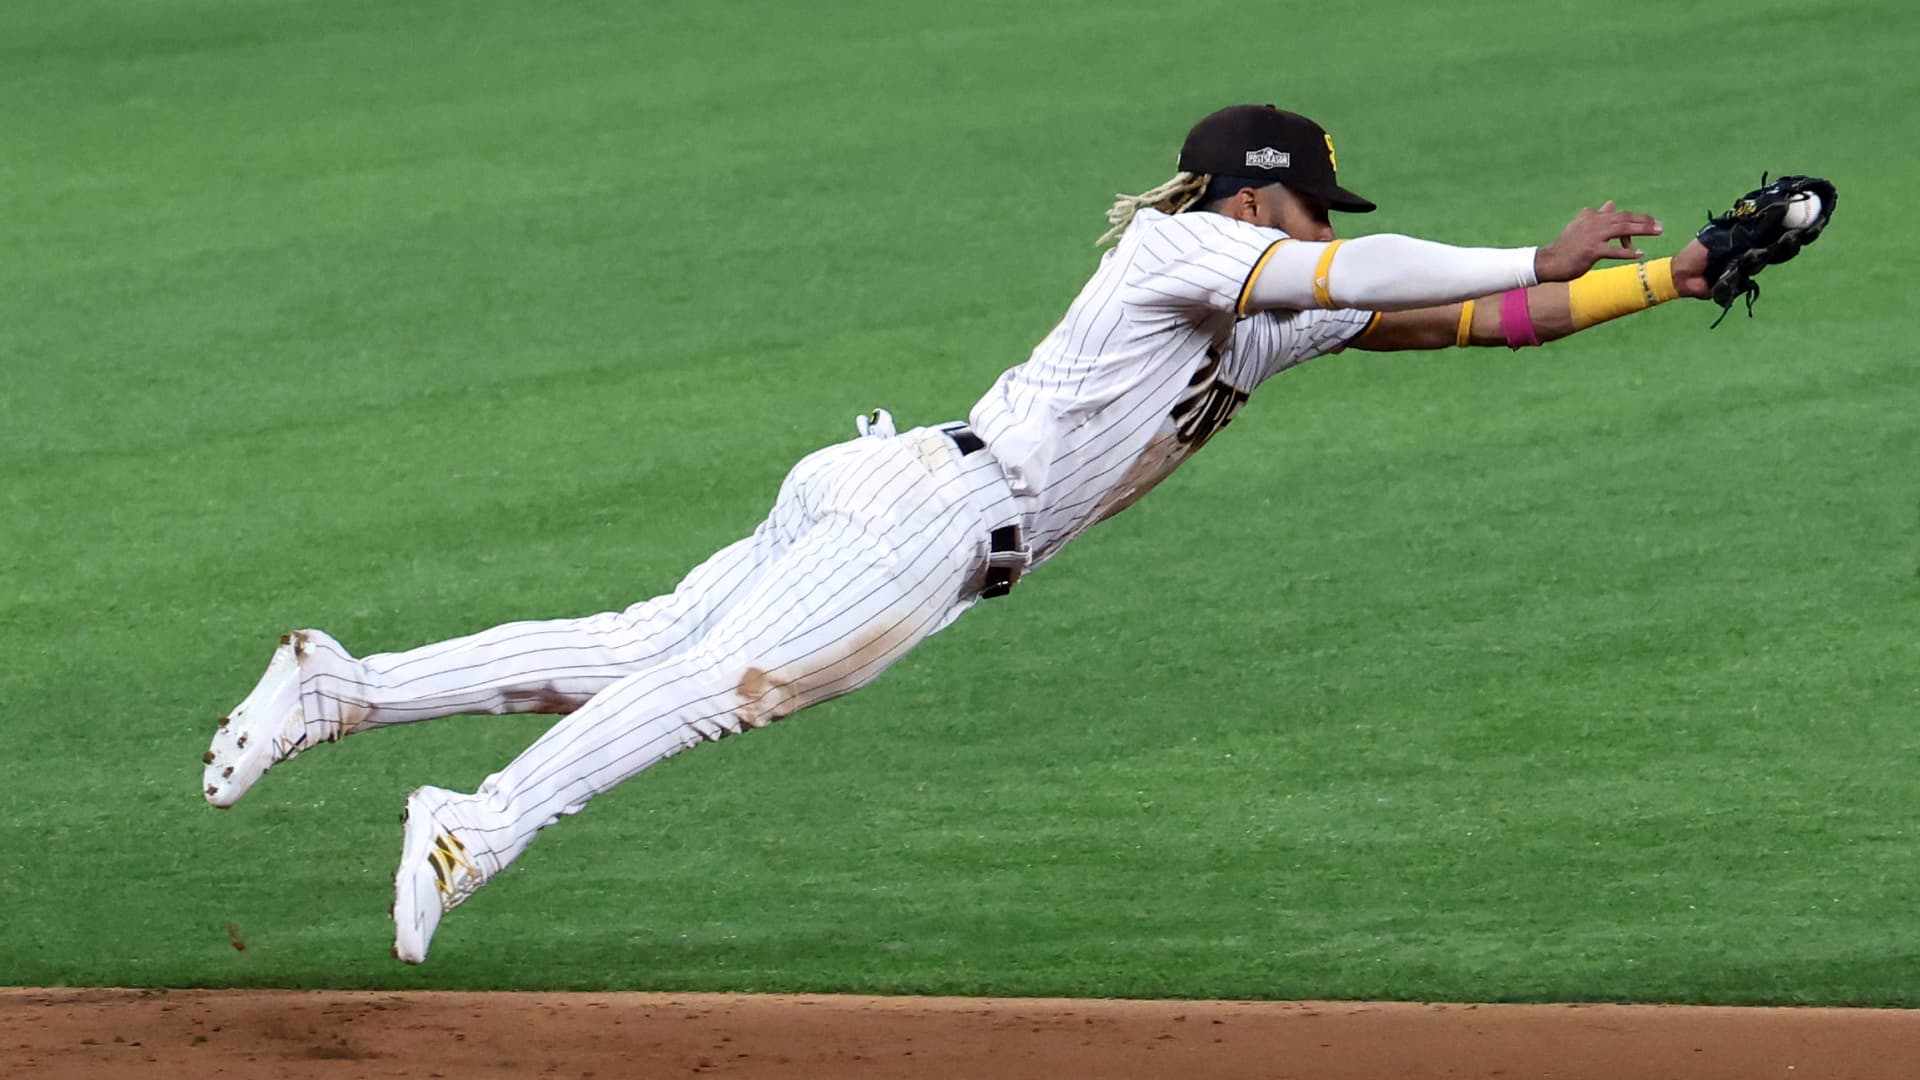 Fernando Tatis Jr. #23 of the San Diego Padres dives to cut off a ball hit by Corey Seager #5 of the Los Angeles Dodgers (not pictured) during the third inning in Game Three of the National League Division Series at Globe Life Field on October 08, 2020 in Arlington, Texas.